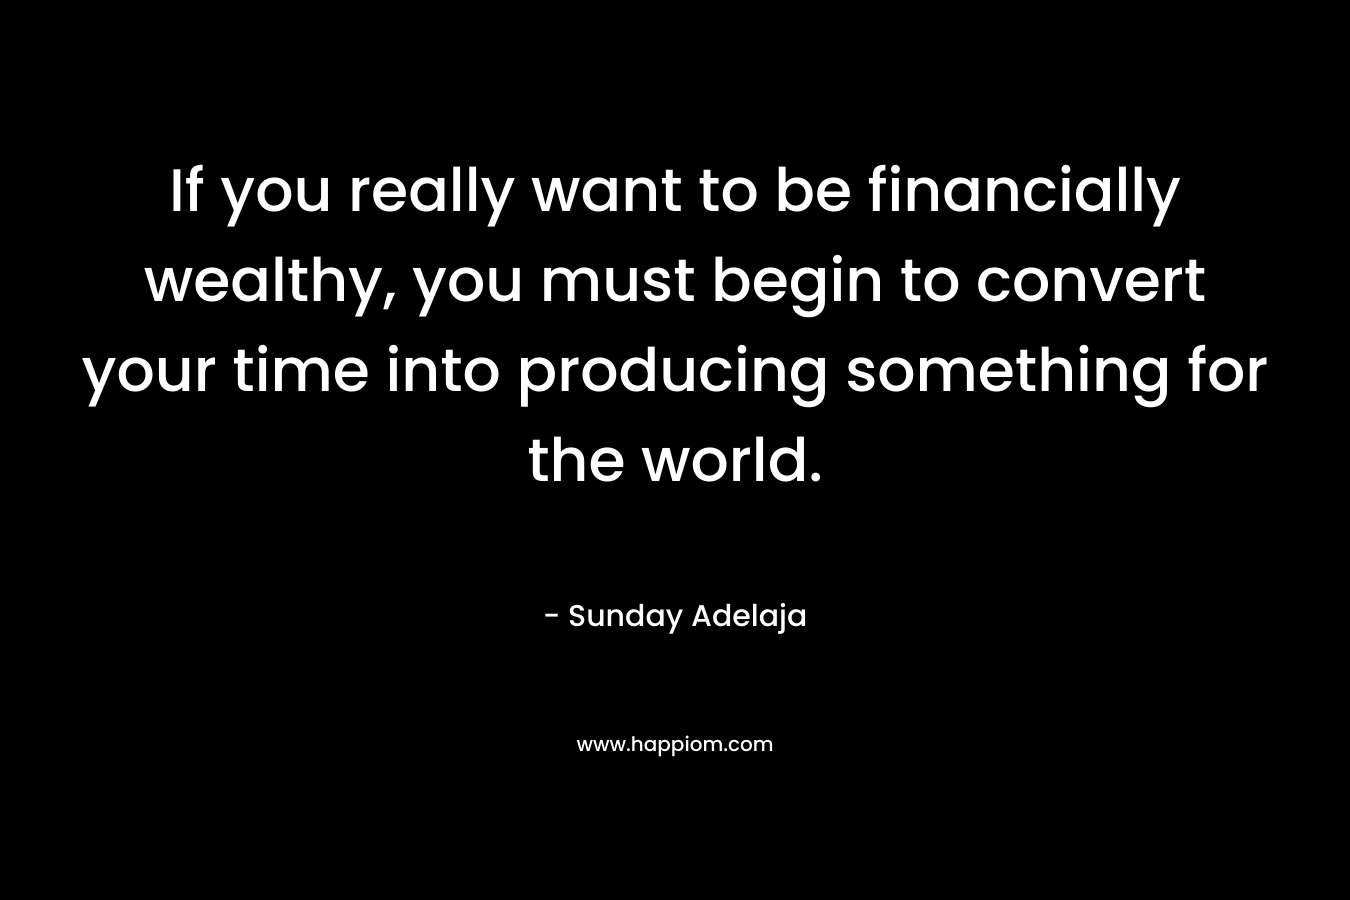 If you really want to be financially wealthy, you must begin to convert your time into producing something for the world.